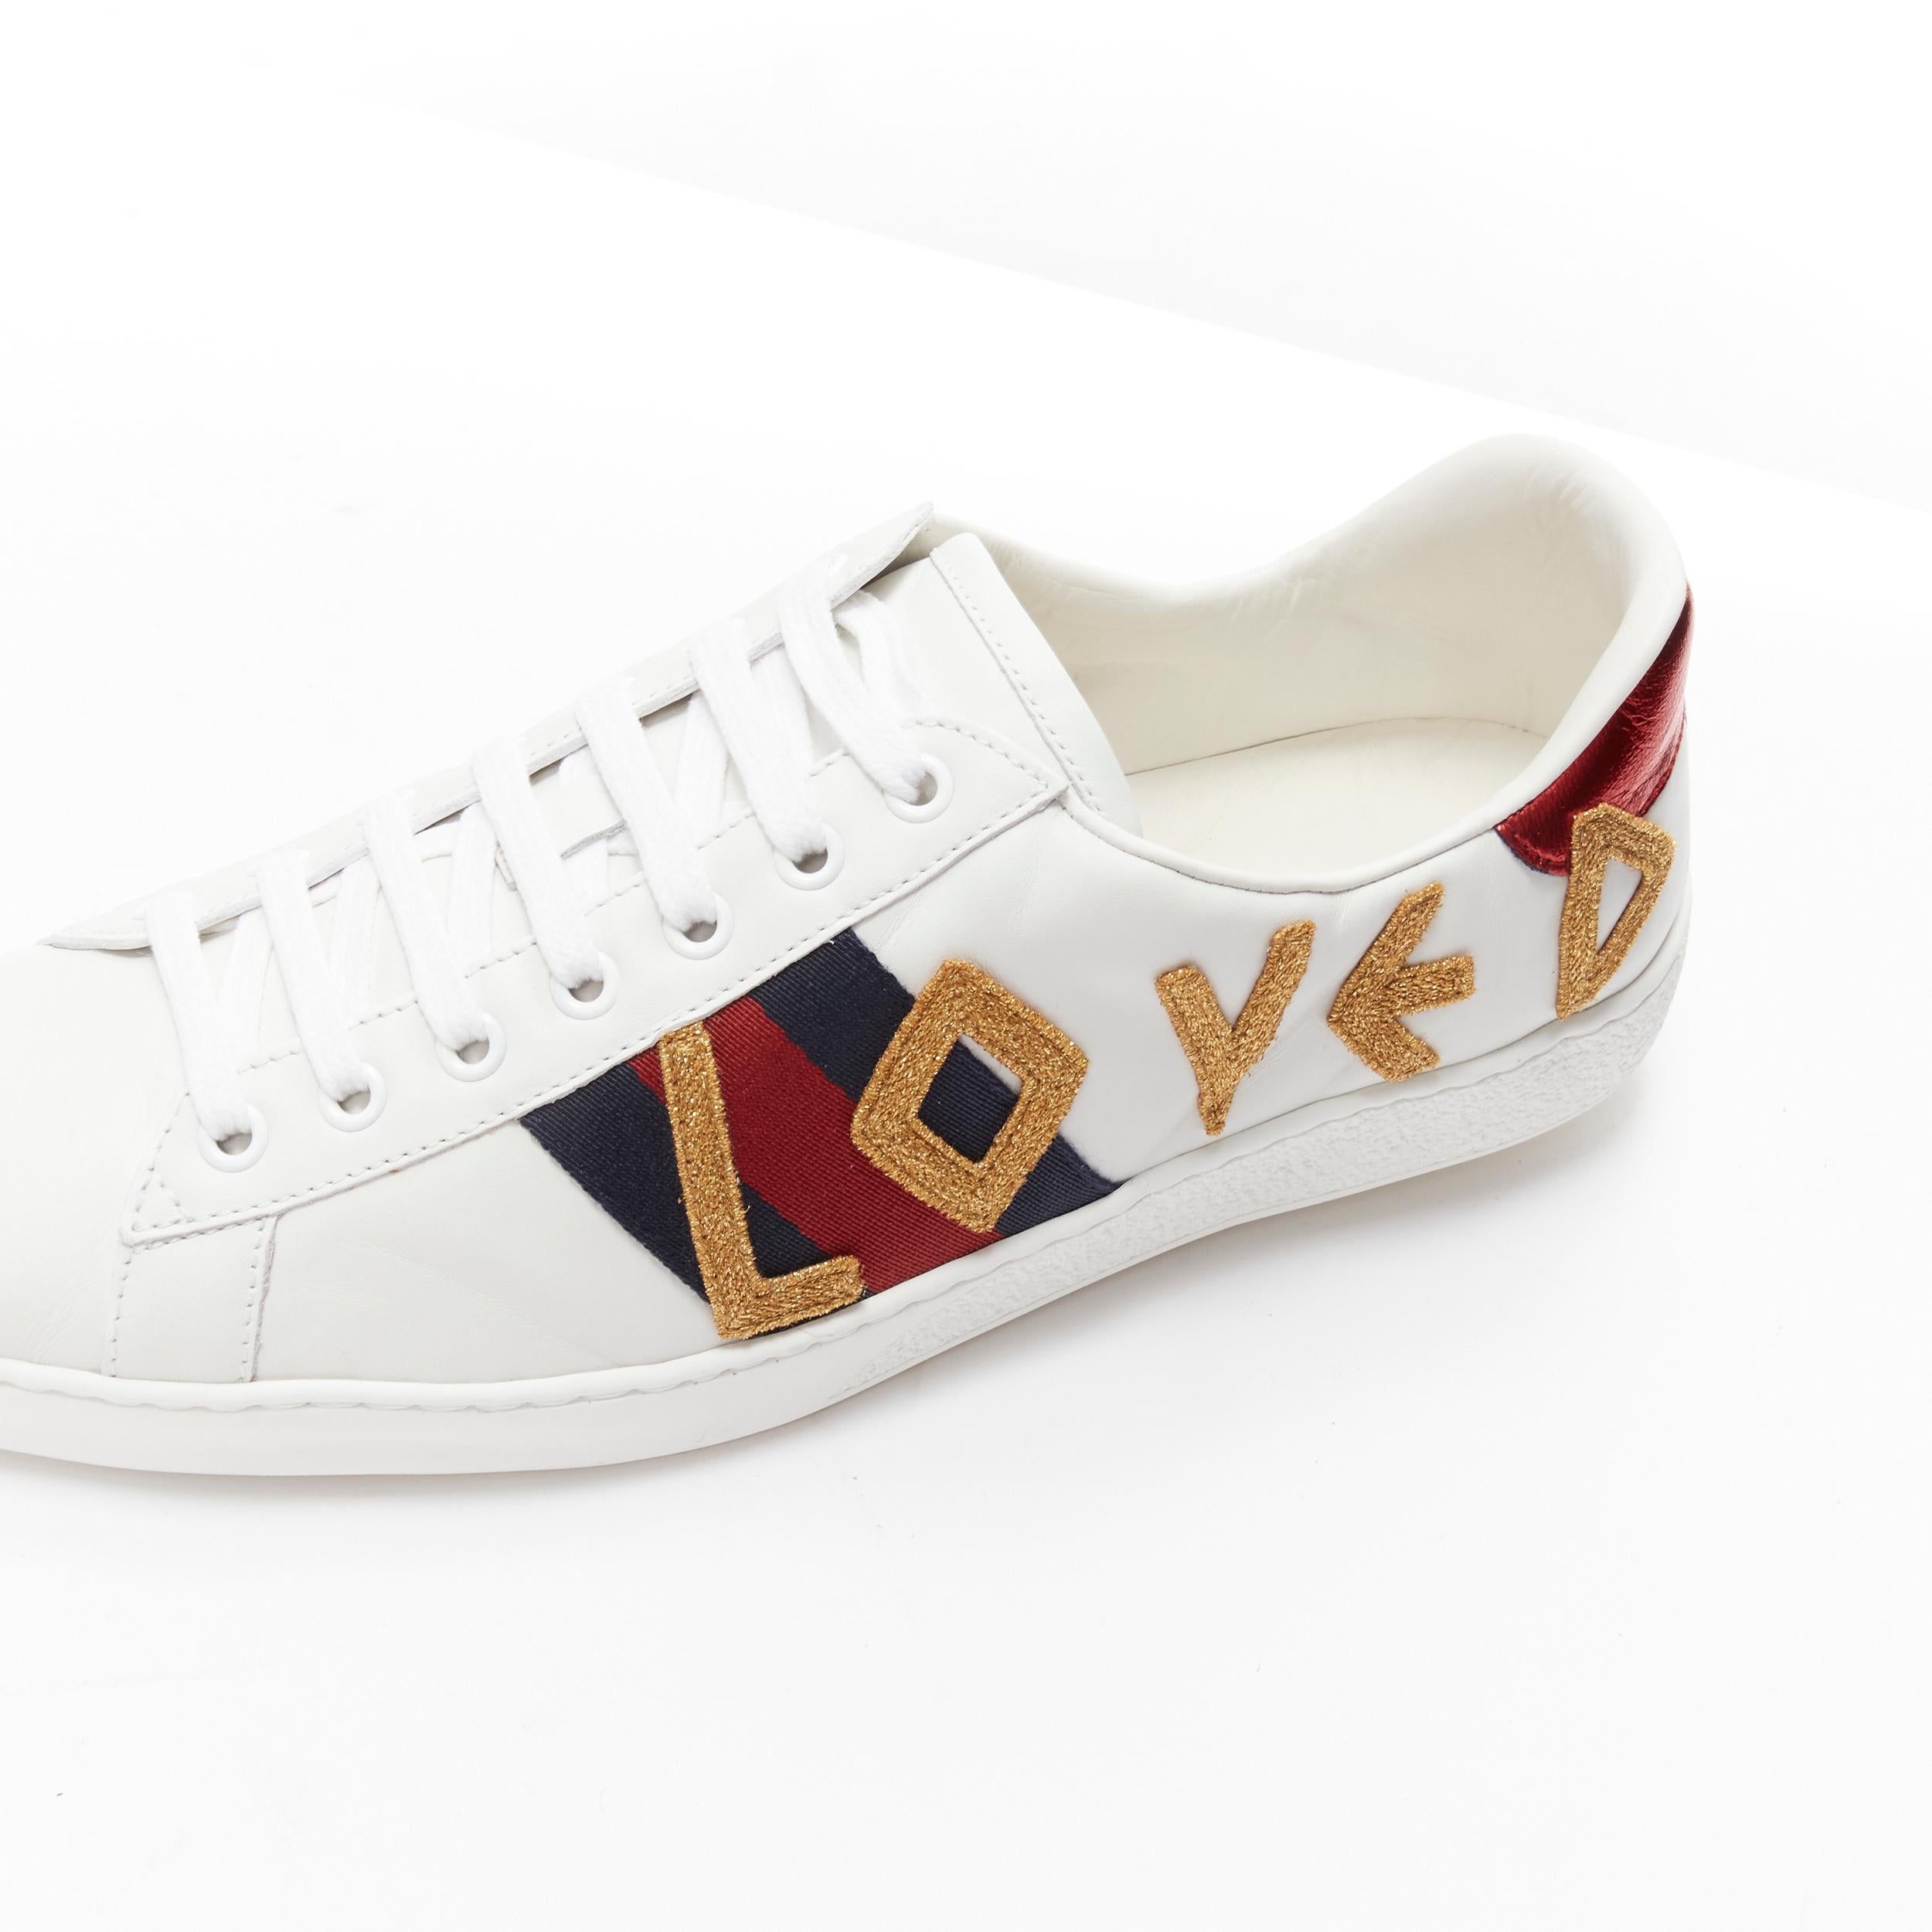 GUCCI Ace Loved gold letter patchwork white navy red web sneaker UK9 EU43 For Sale 2